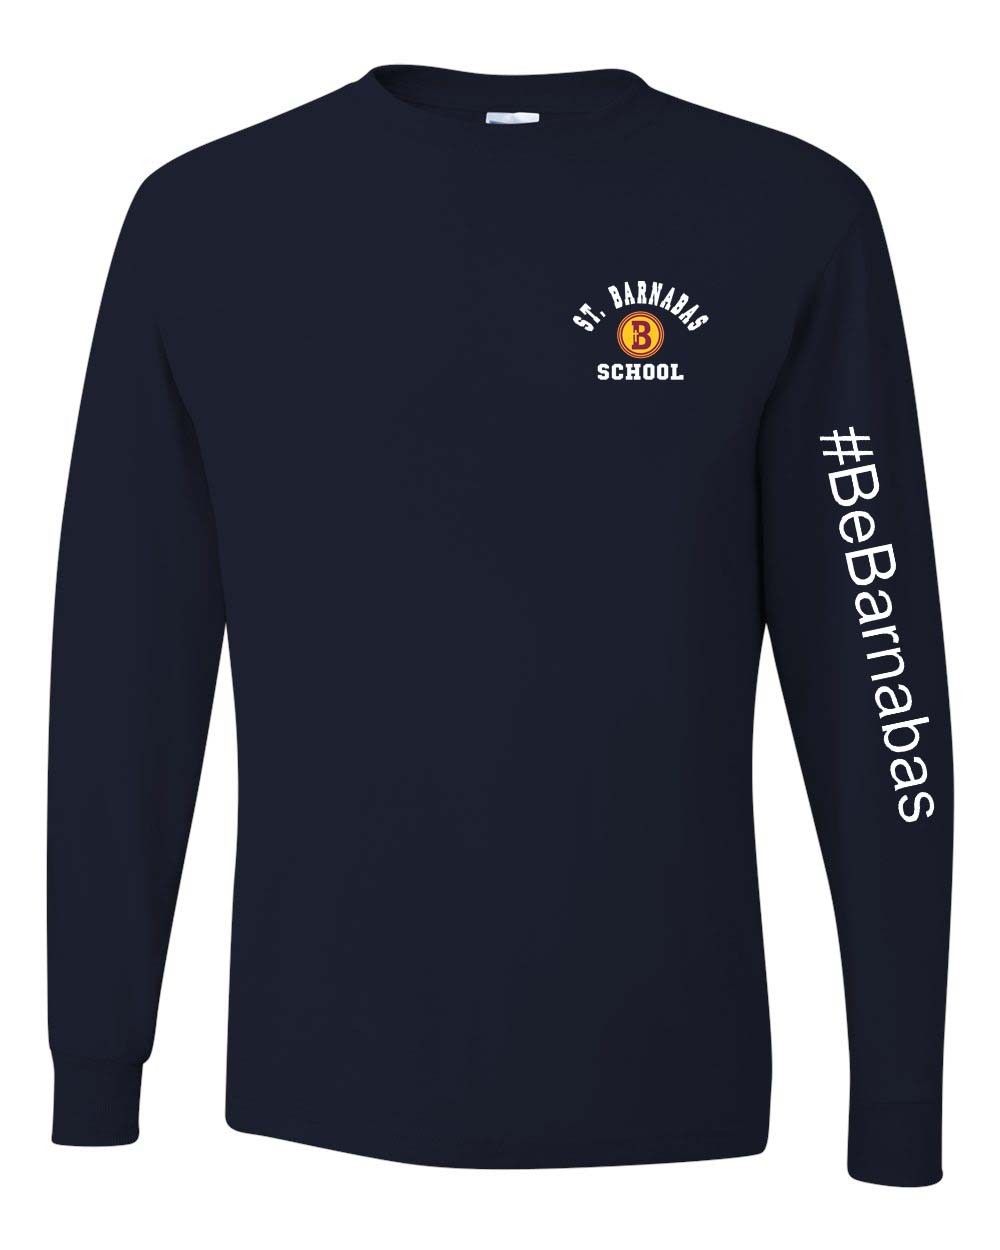 SBS Staff Be Barnabas Spirit L/S T-shirt w/ Logo - Please Allow 2-3 Weeks for Delivery